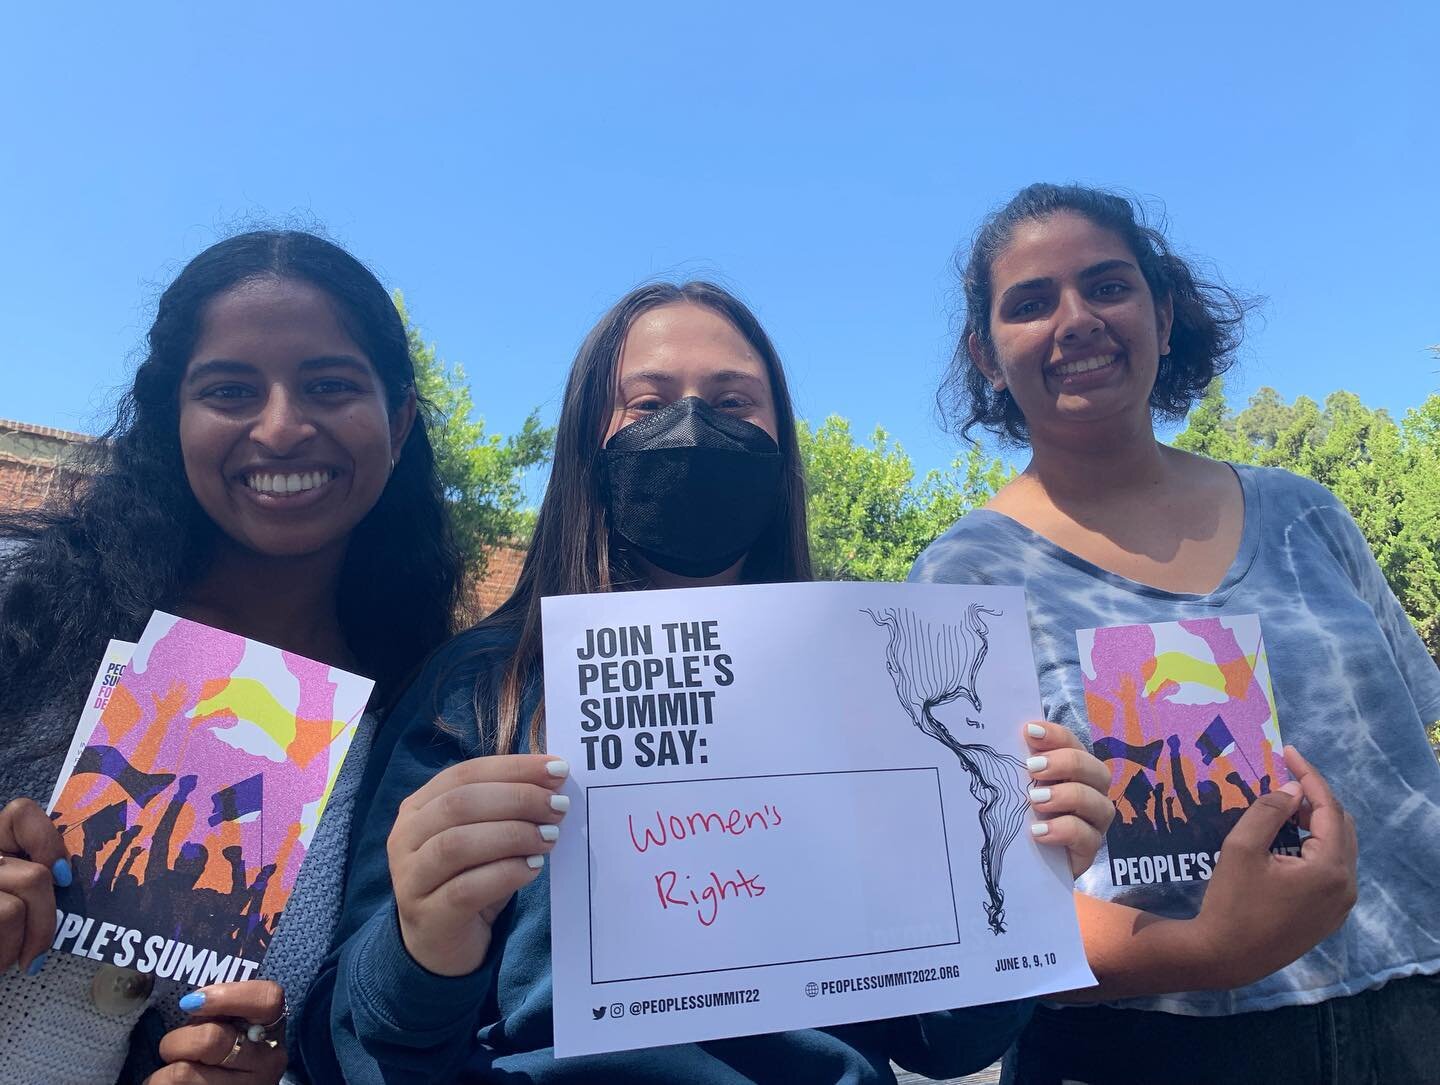 Today we talked to some amazing UCLA students about The People&rsquo;s Summit and learned about the issues they care about. 

We&rsquo;re so excited to join everyone on June 8,9,10th in ☀️ Los Angeles for three days of art, music, panel discussions, 